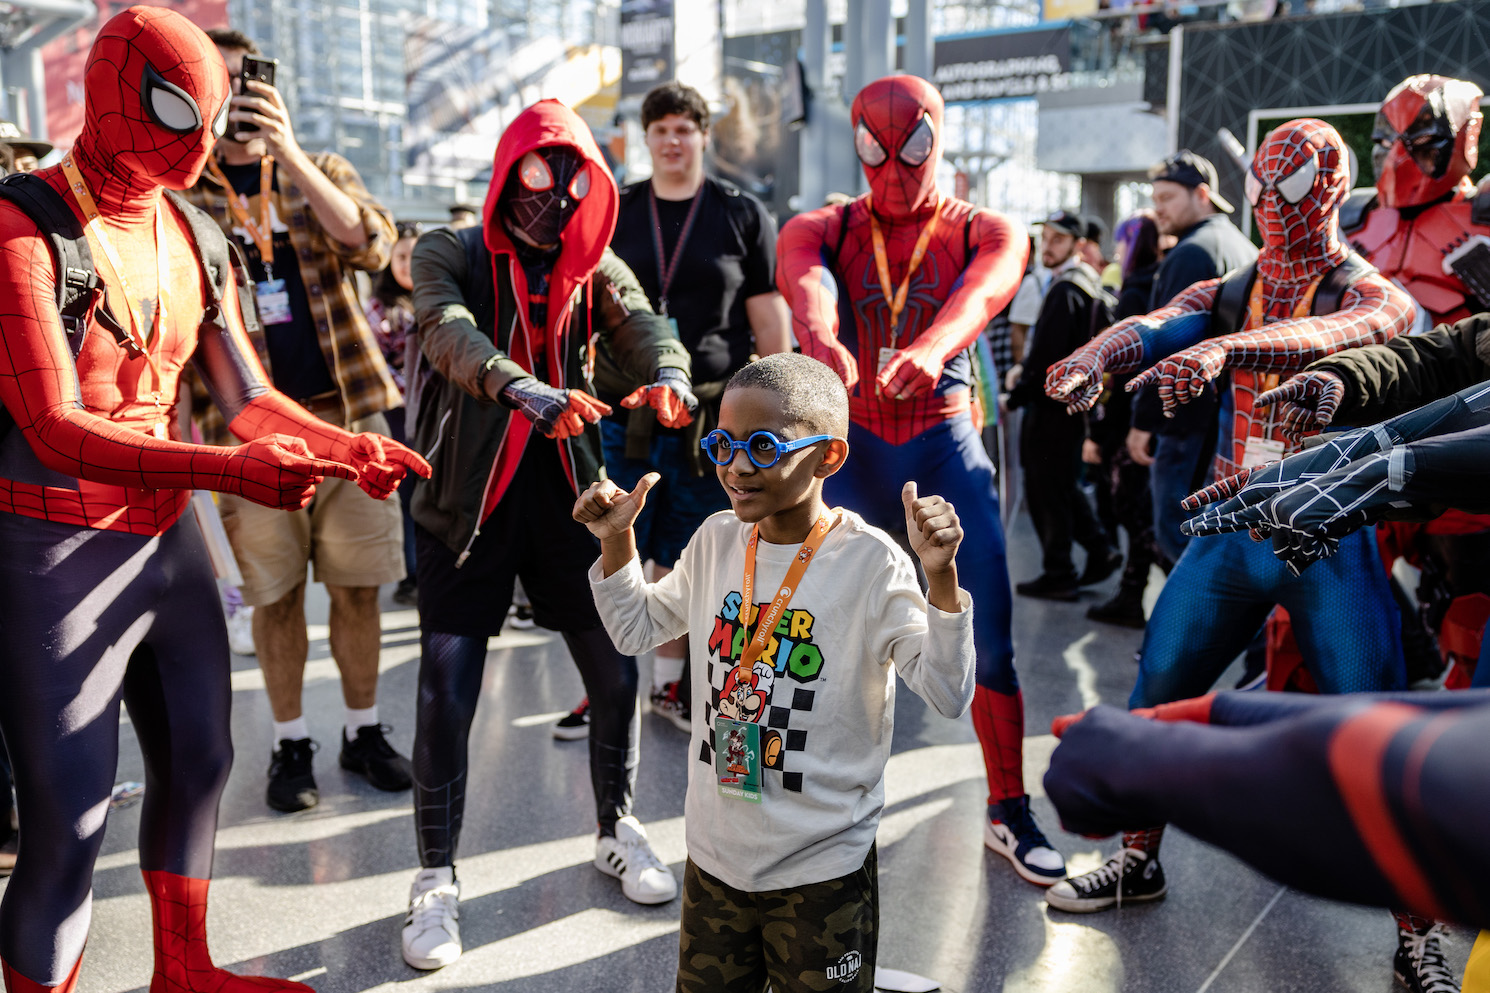 A circle of cosplayers dressed as different versions of Spider-Man surround a child and point at him. From left to right, a person in a red-and-blue classic Spider-Man bodysuit, a person in a black suit with a black-and-red hoodie, another classic Spider-Man, a Spider-Man from the Tobey Maguire movie in a red-and-blue suit with white spider web accents. A child in the center of the circle is dressed in a white shirt that reads "Super Mario" in rainbow letters, depicting the Mario character in front of a black-and-white checkered rectangle.